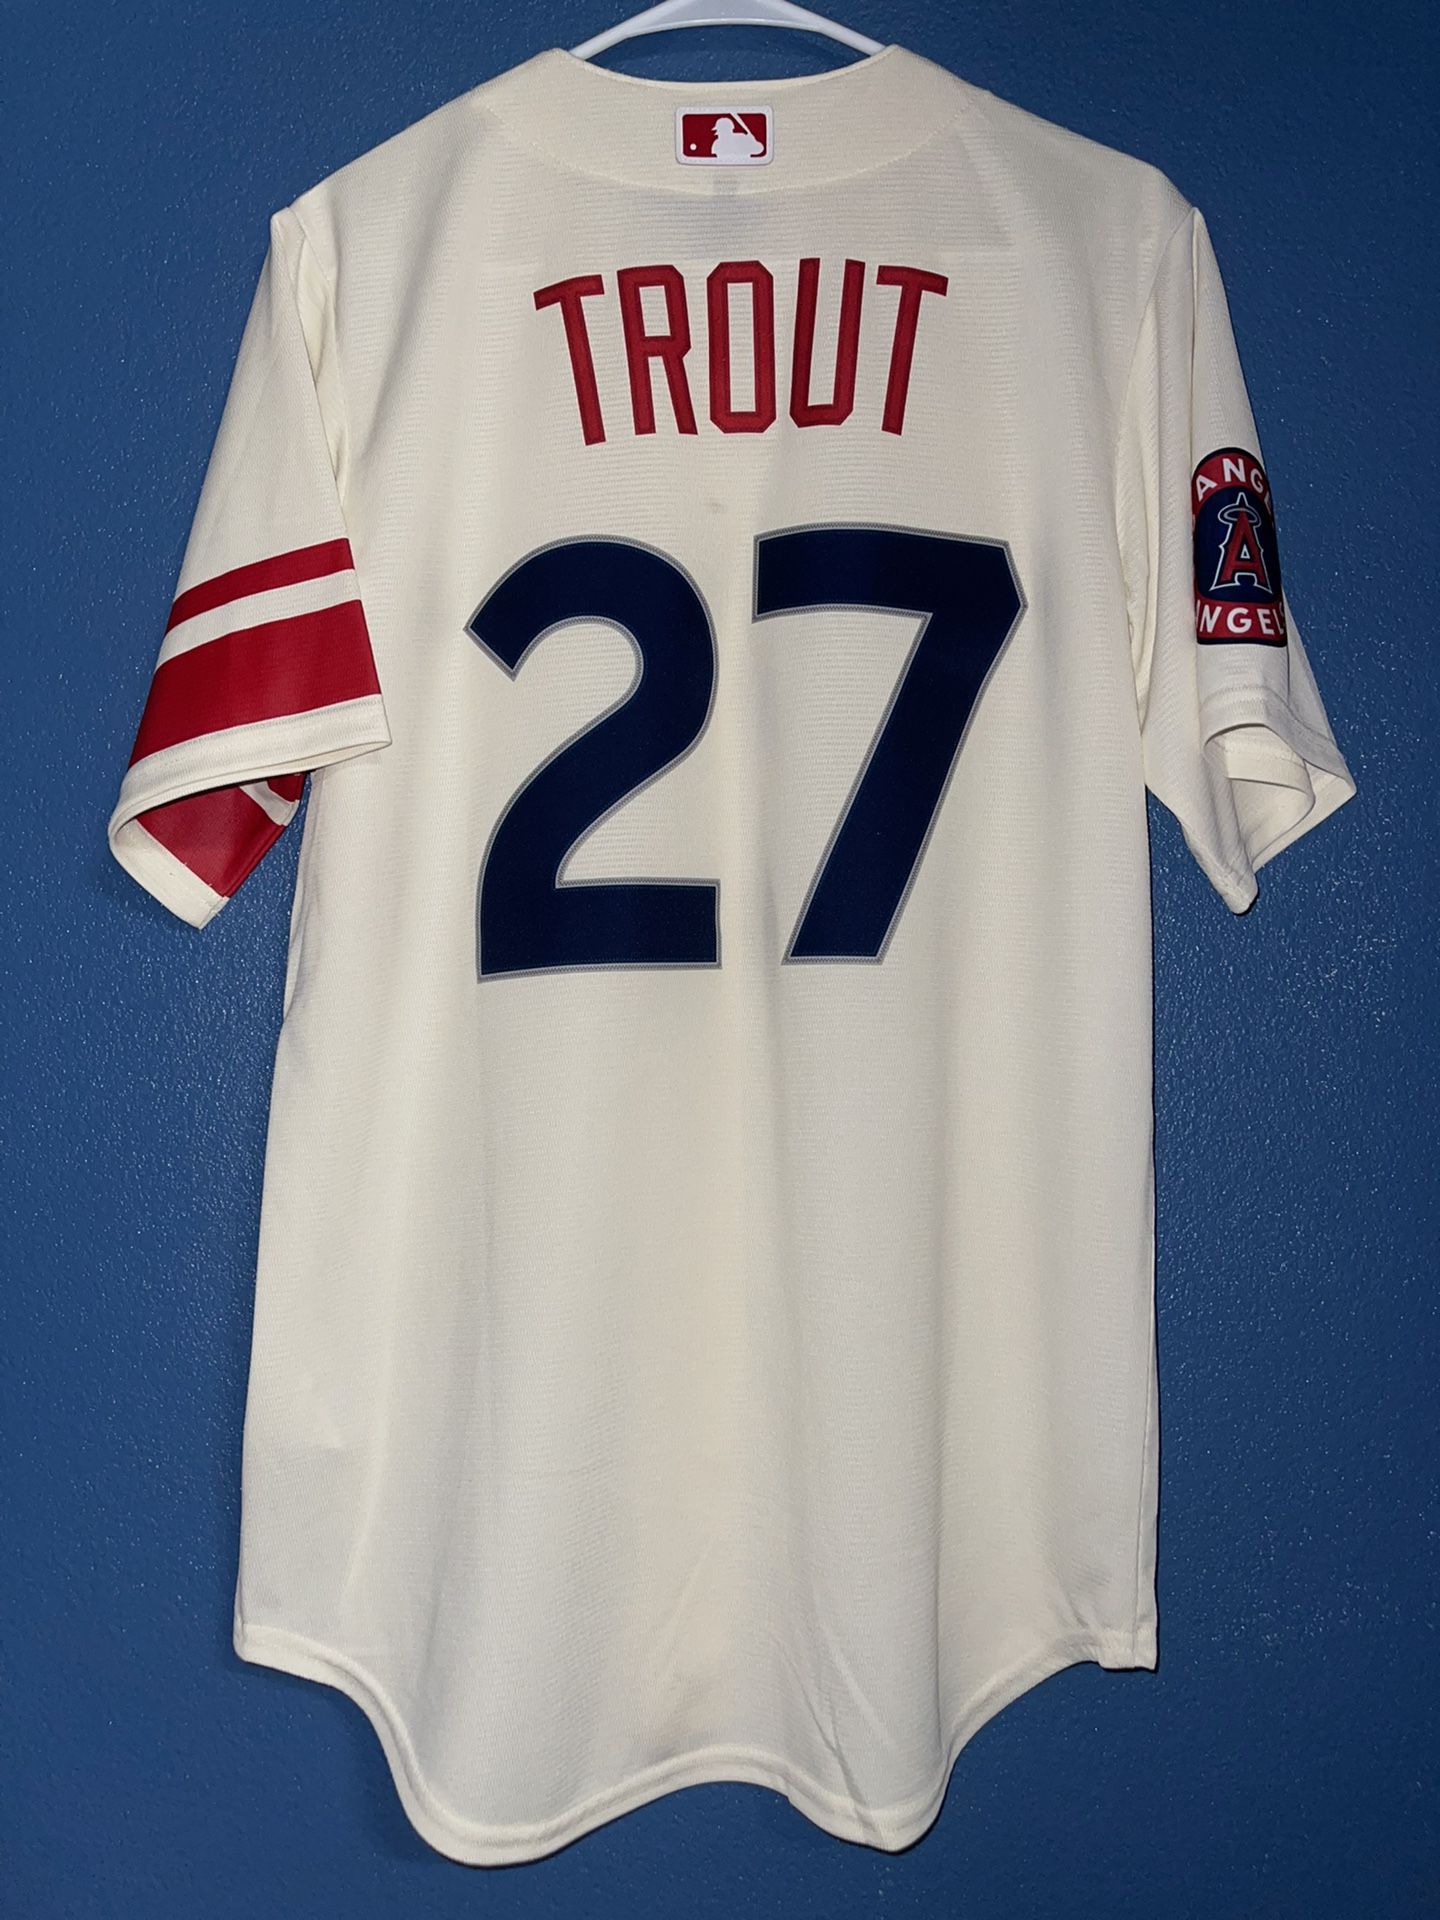 Mike Trout Jersey City Connect New for Sale in Diamond Bar, CA